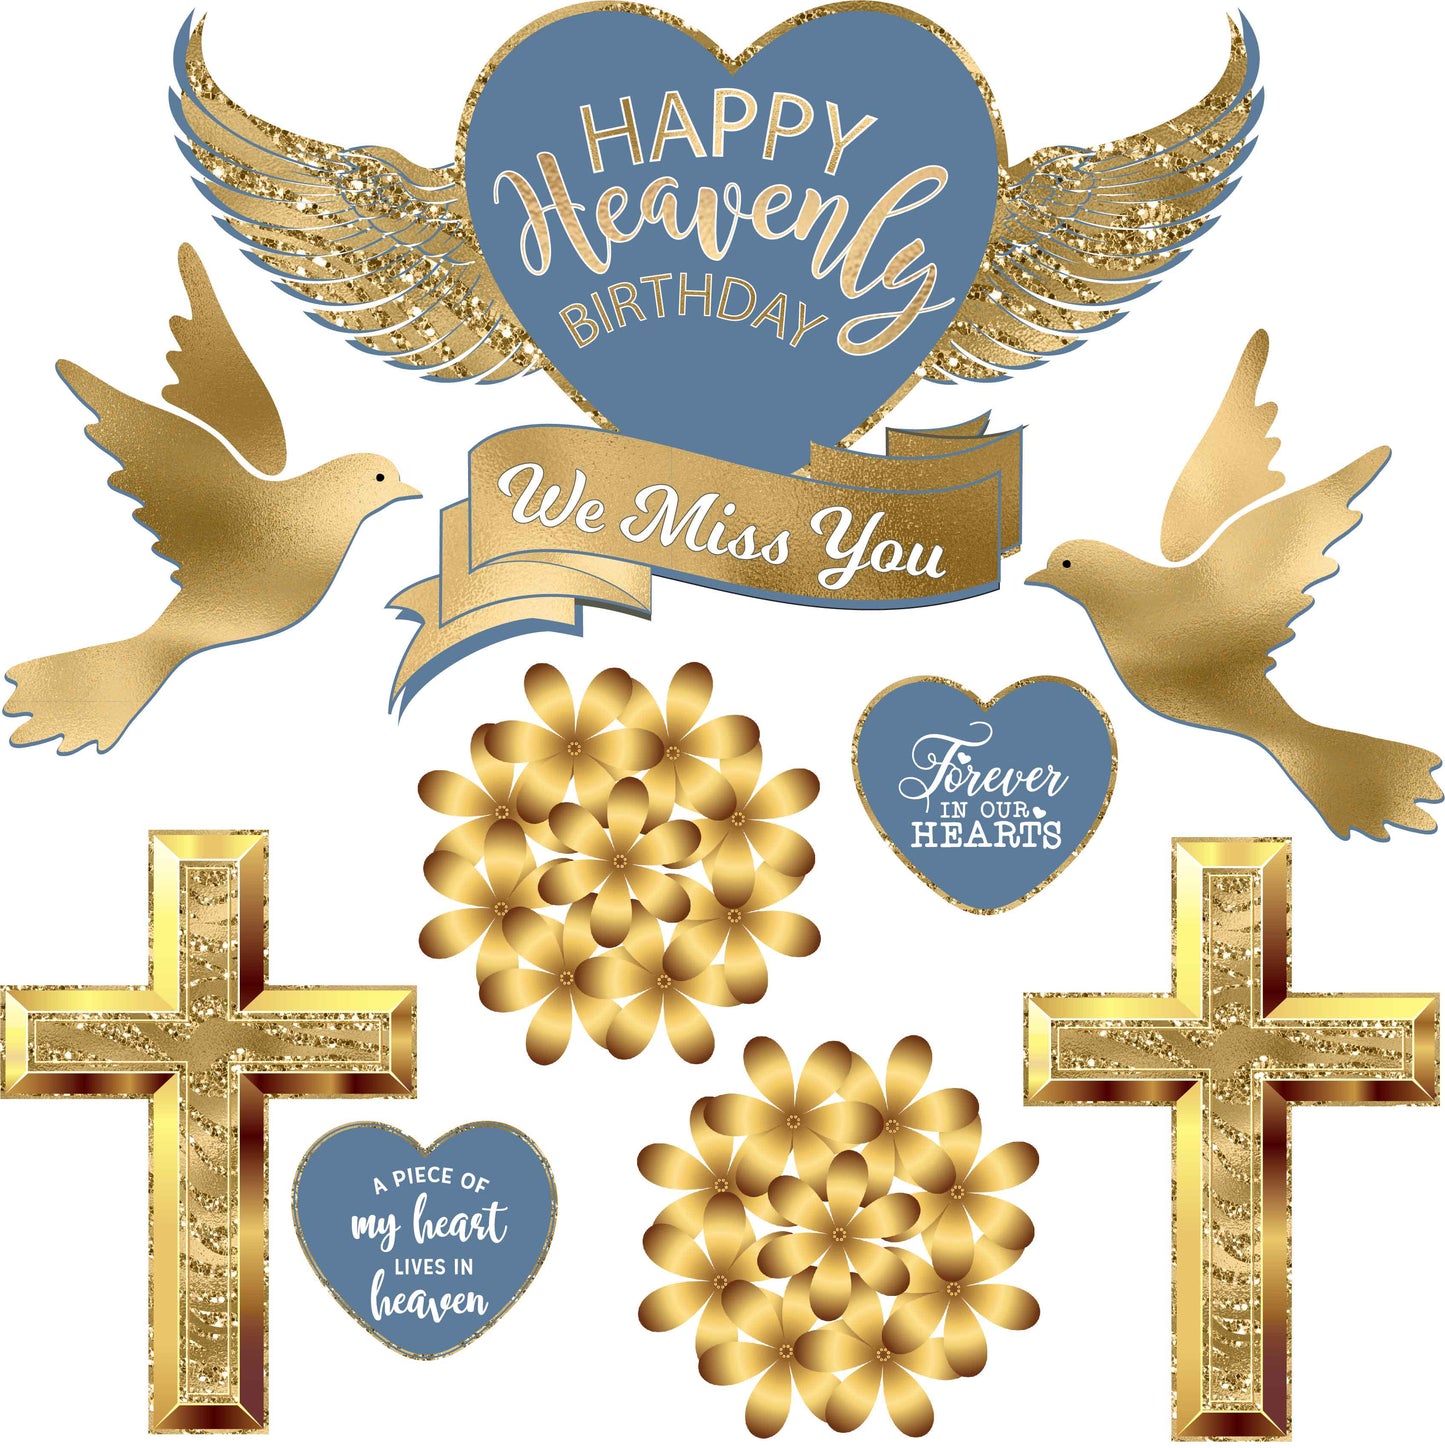 Happy Heavenly Birthday Gold & Slate Theme Half Sheet Misc. (Must Purchase 2 Half sheets - You Can Mix & Match)